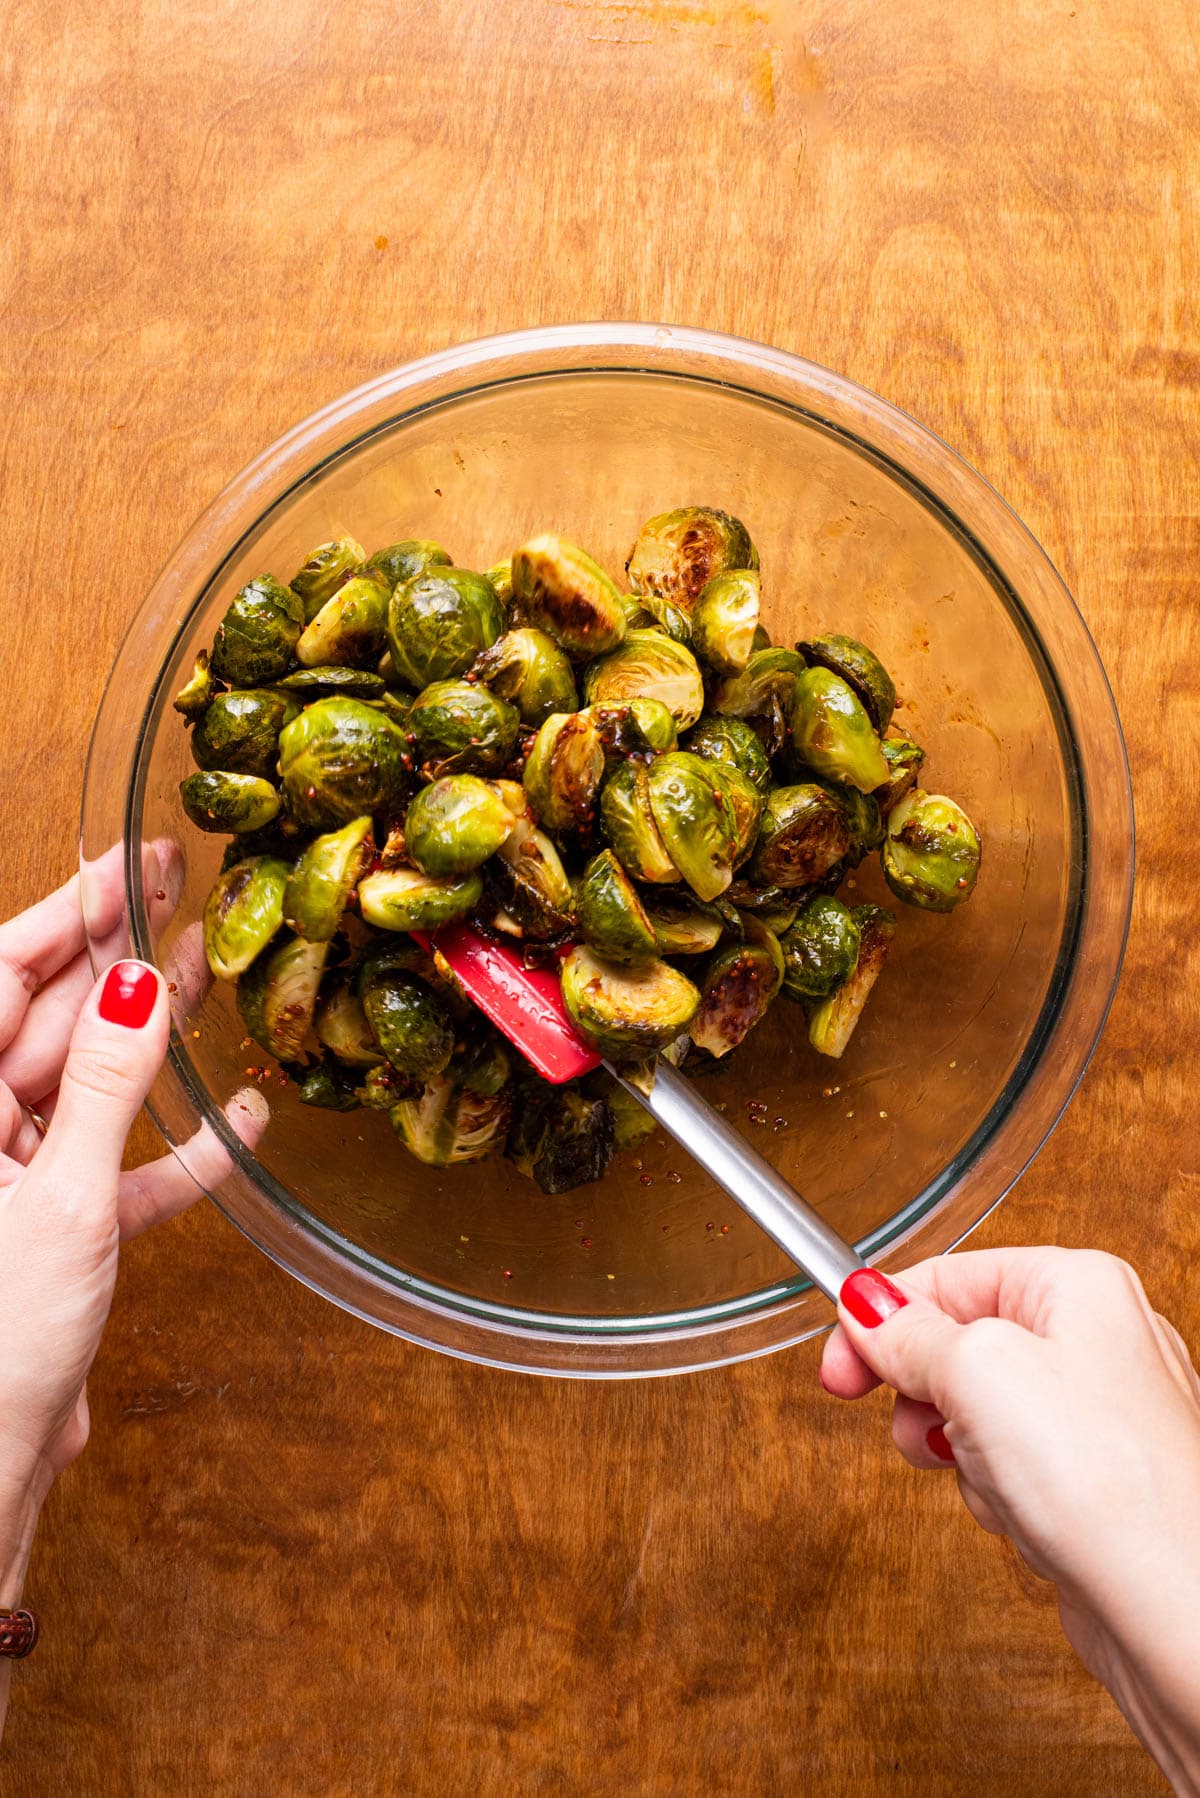 Coating roasted Brussels sprouts with balsamic maple glaze in a glass bowl.